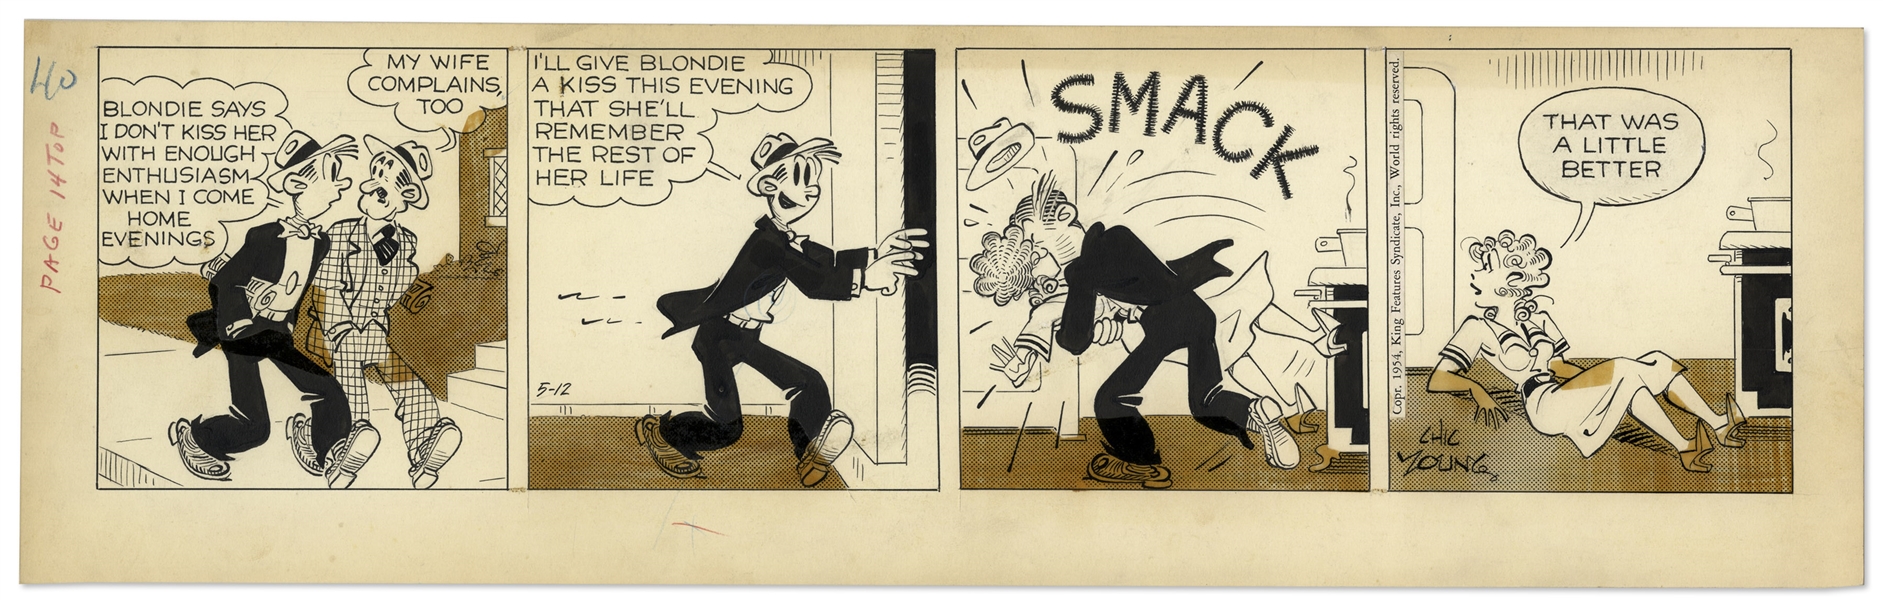 2 Chic Young Hand-Drawn ''Blondie'' Comic Strips From 1954 Tilted ''Chip Off the Old Block'' and ''There's Still Room for Improvement''